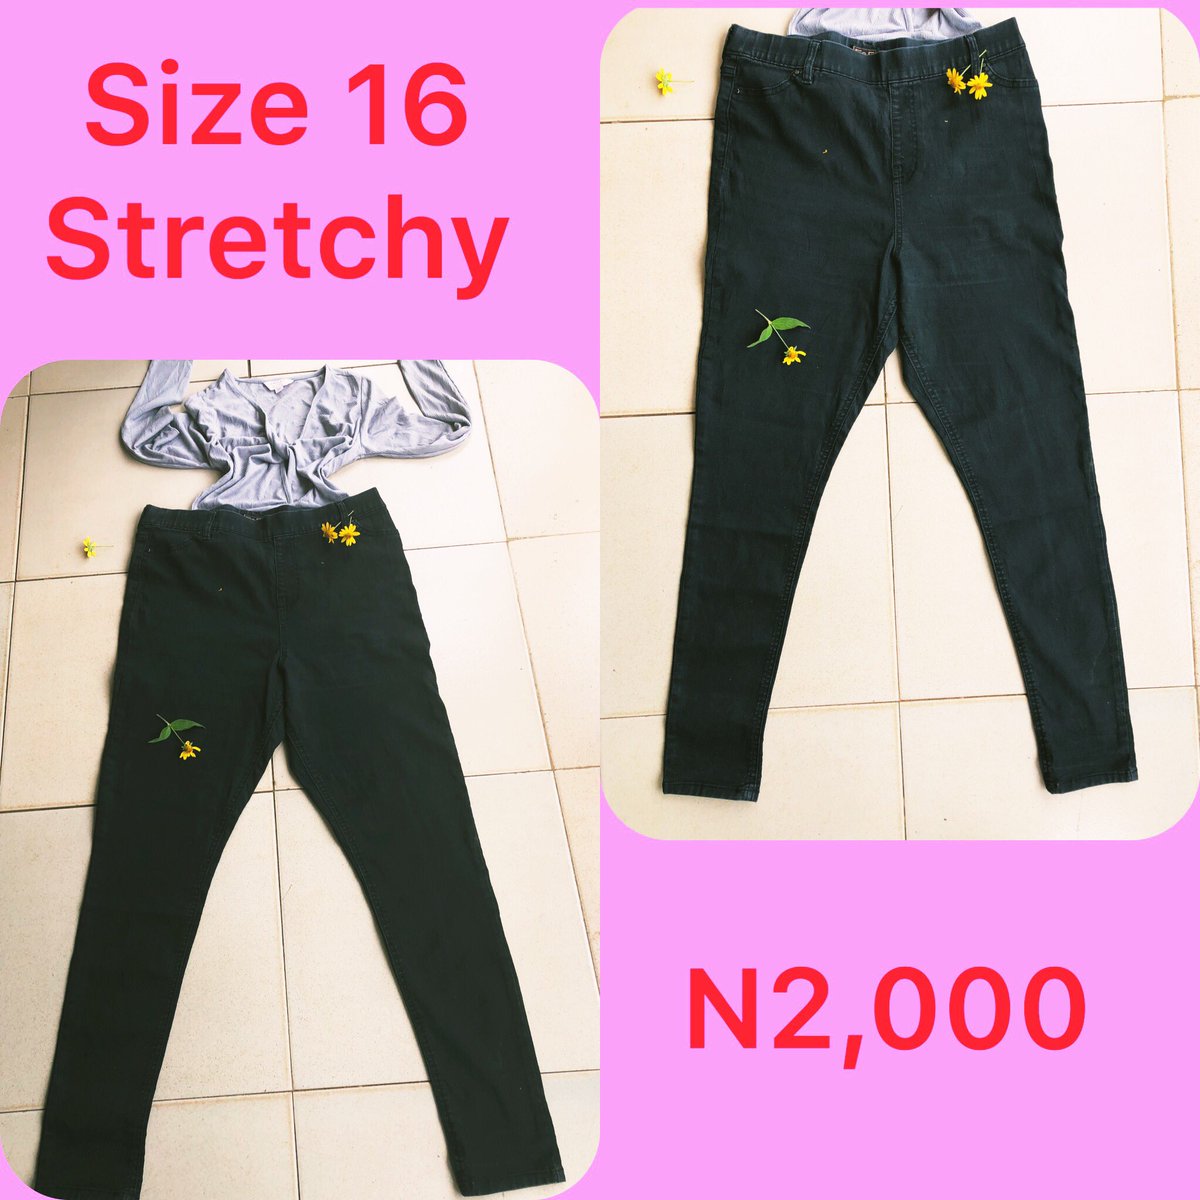 Slide 1: palazzo jeans      Size 16, N2,500Slide 2: bf jeans       Size 14/16, Price: N2,500Slide 3: black skinny jeans       Size 16, Price: N2,000Slide 4: black bf jeans       Size 10, Price N2,000